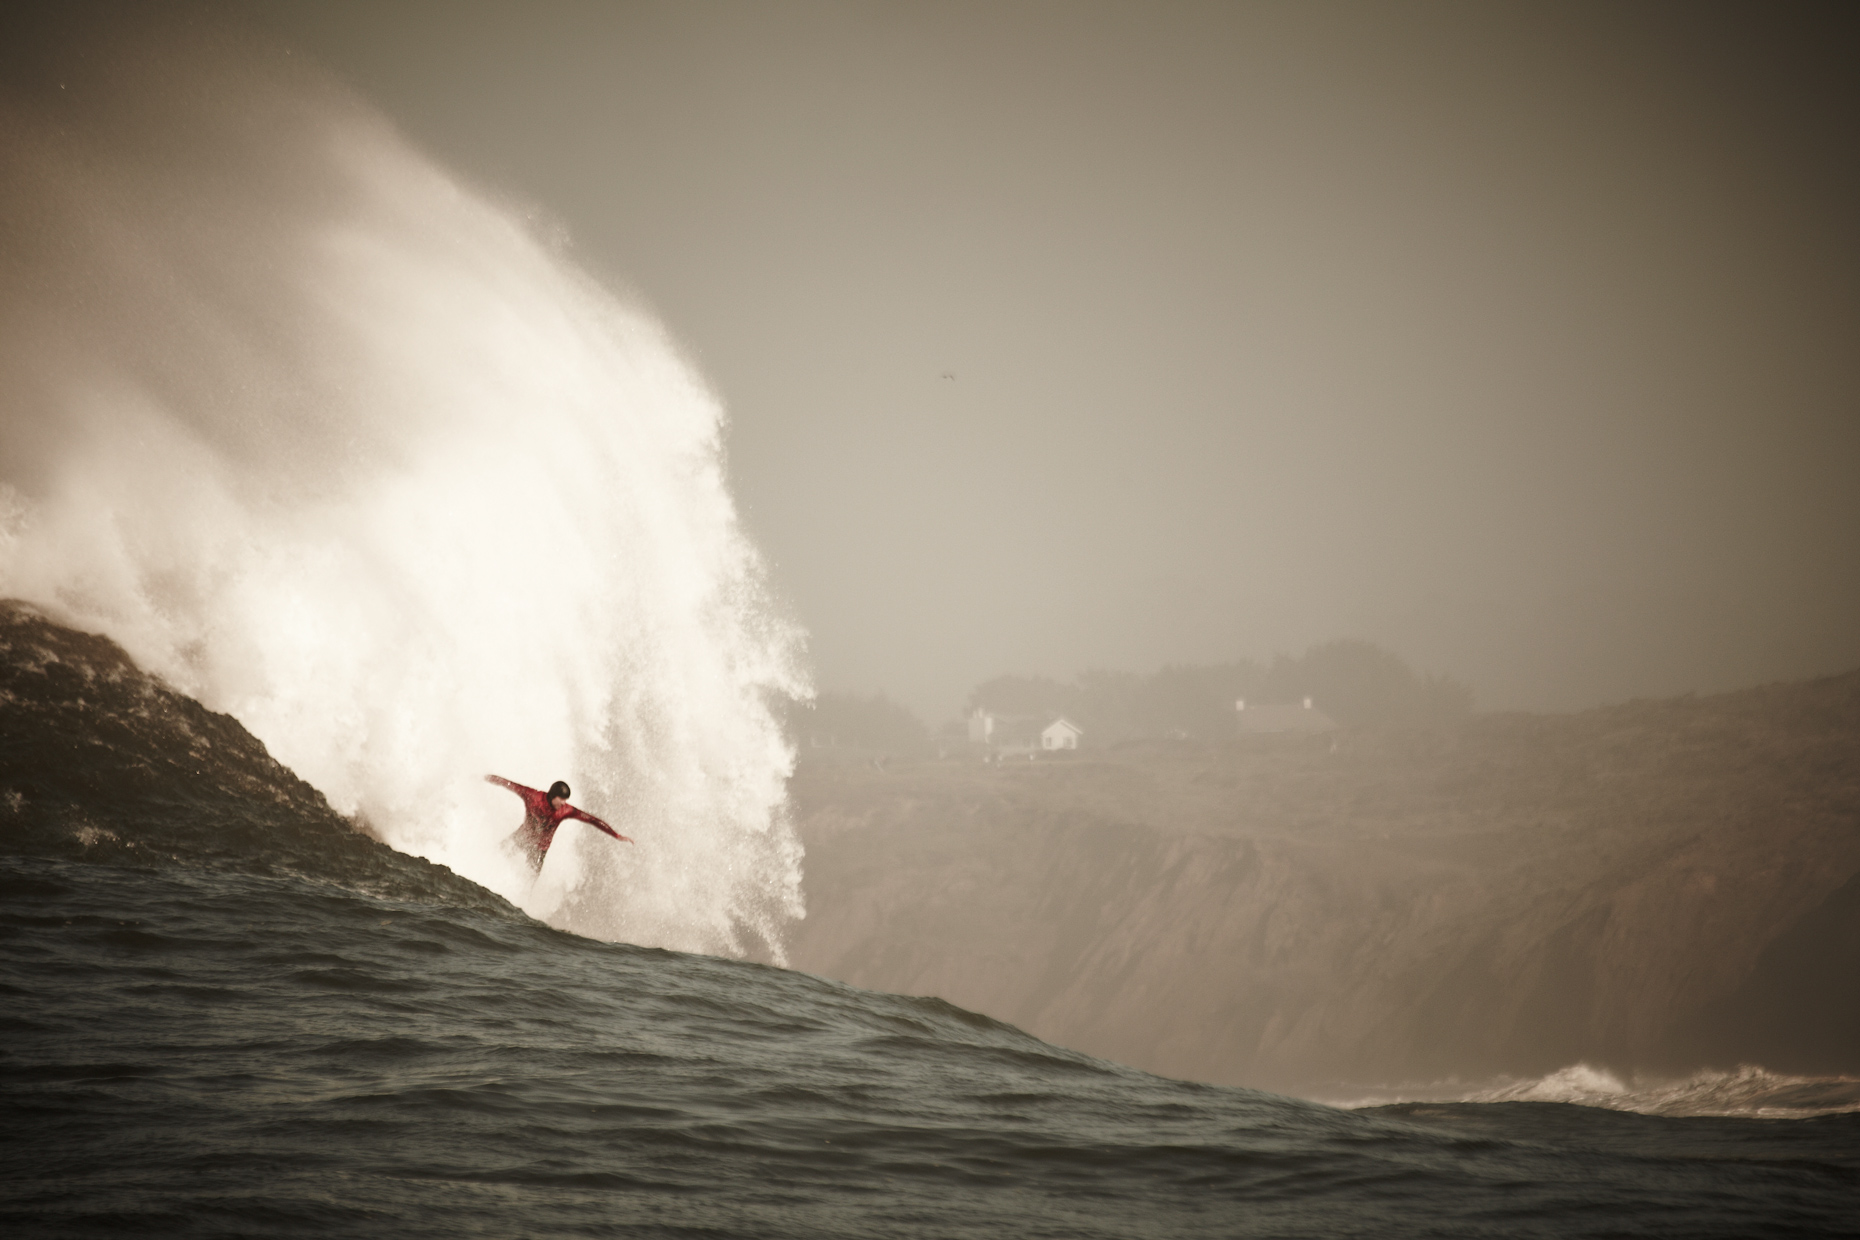 Projects_Action_Photography_Derek_Israelsen_008_Surfing_The_Wave.jpg